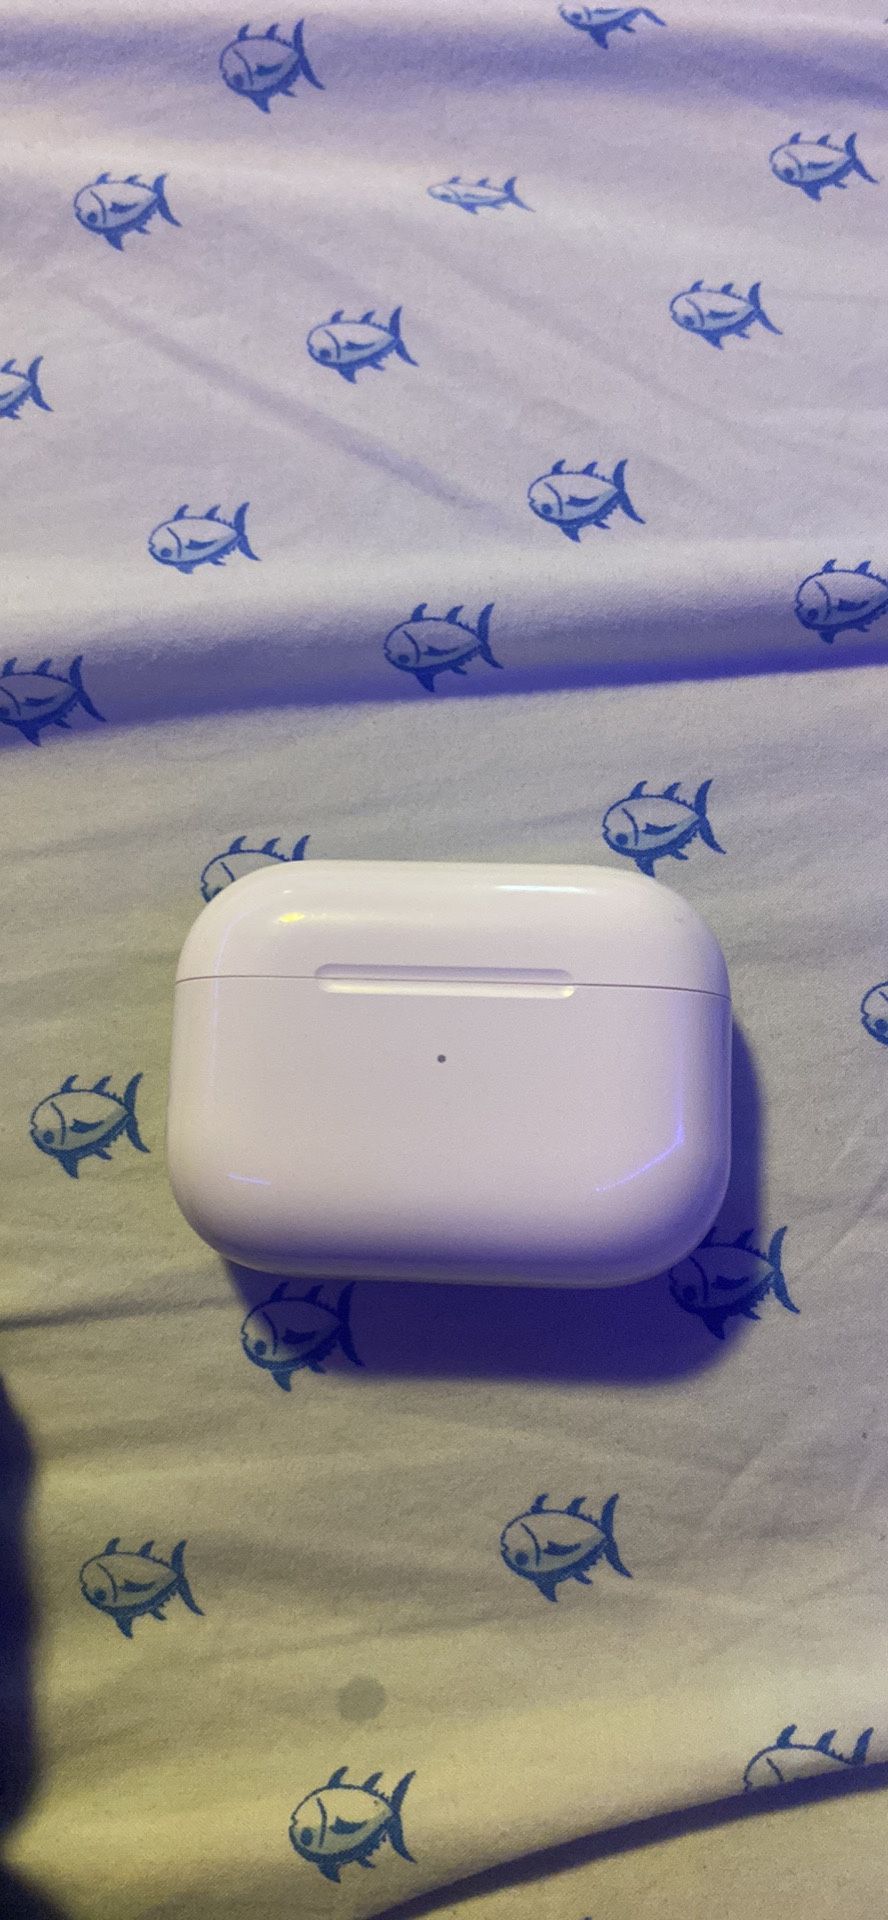 Airpod Pro 2 WITH APPLE CARE